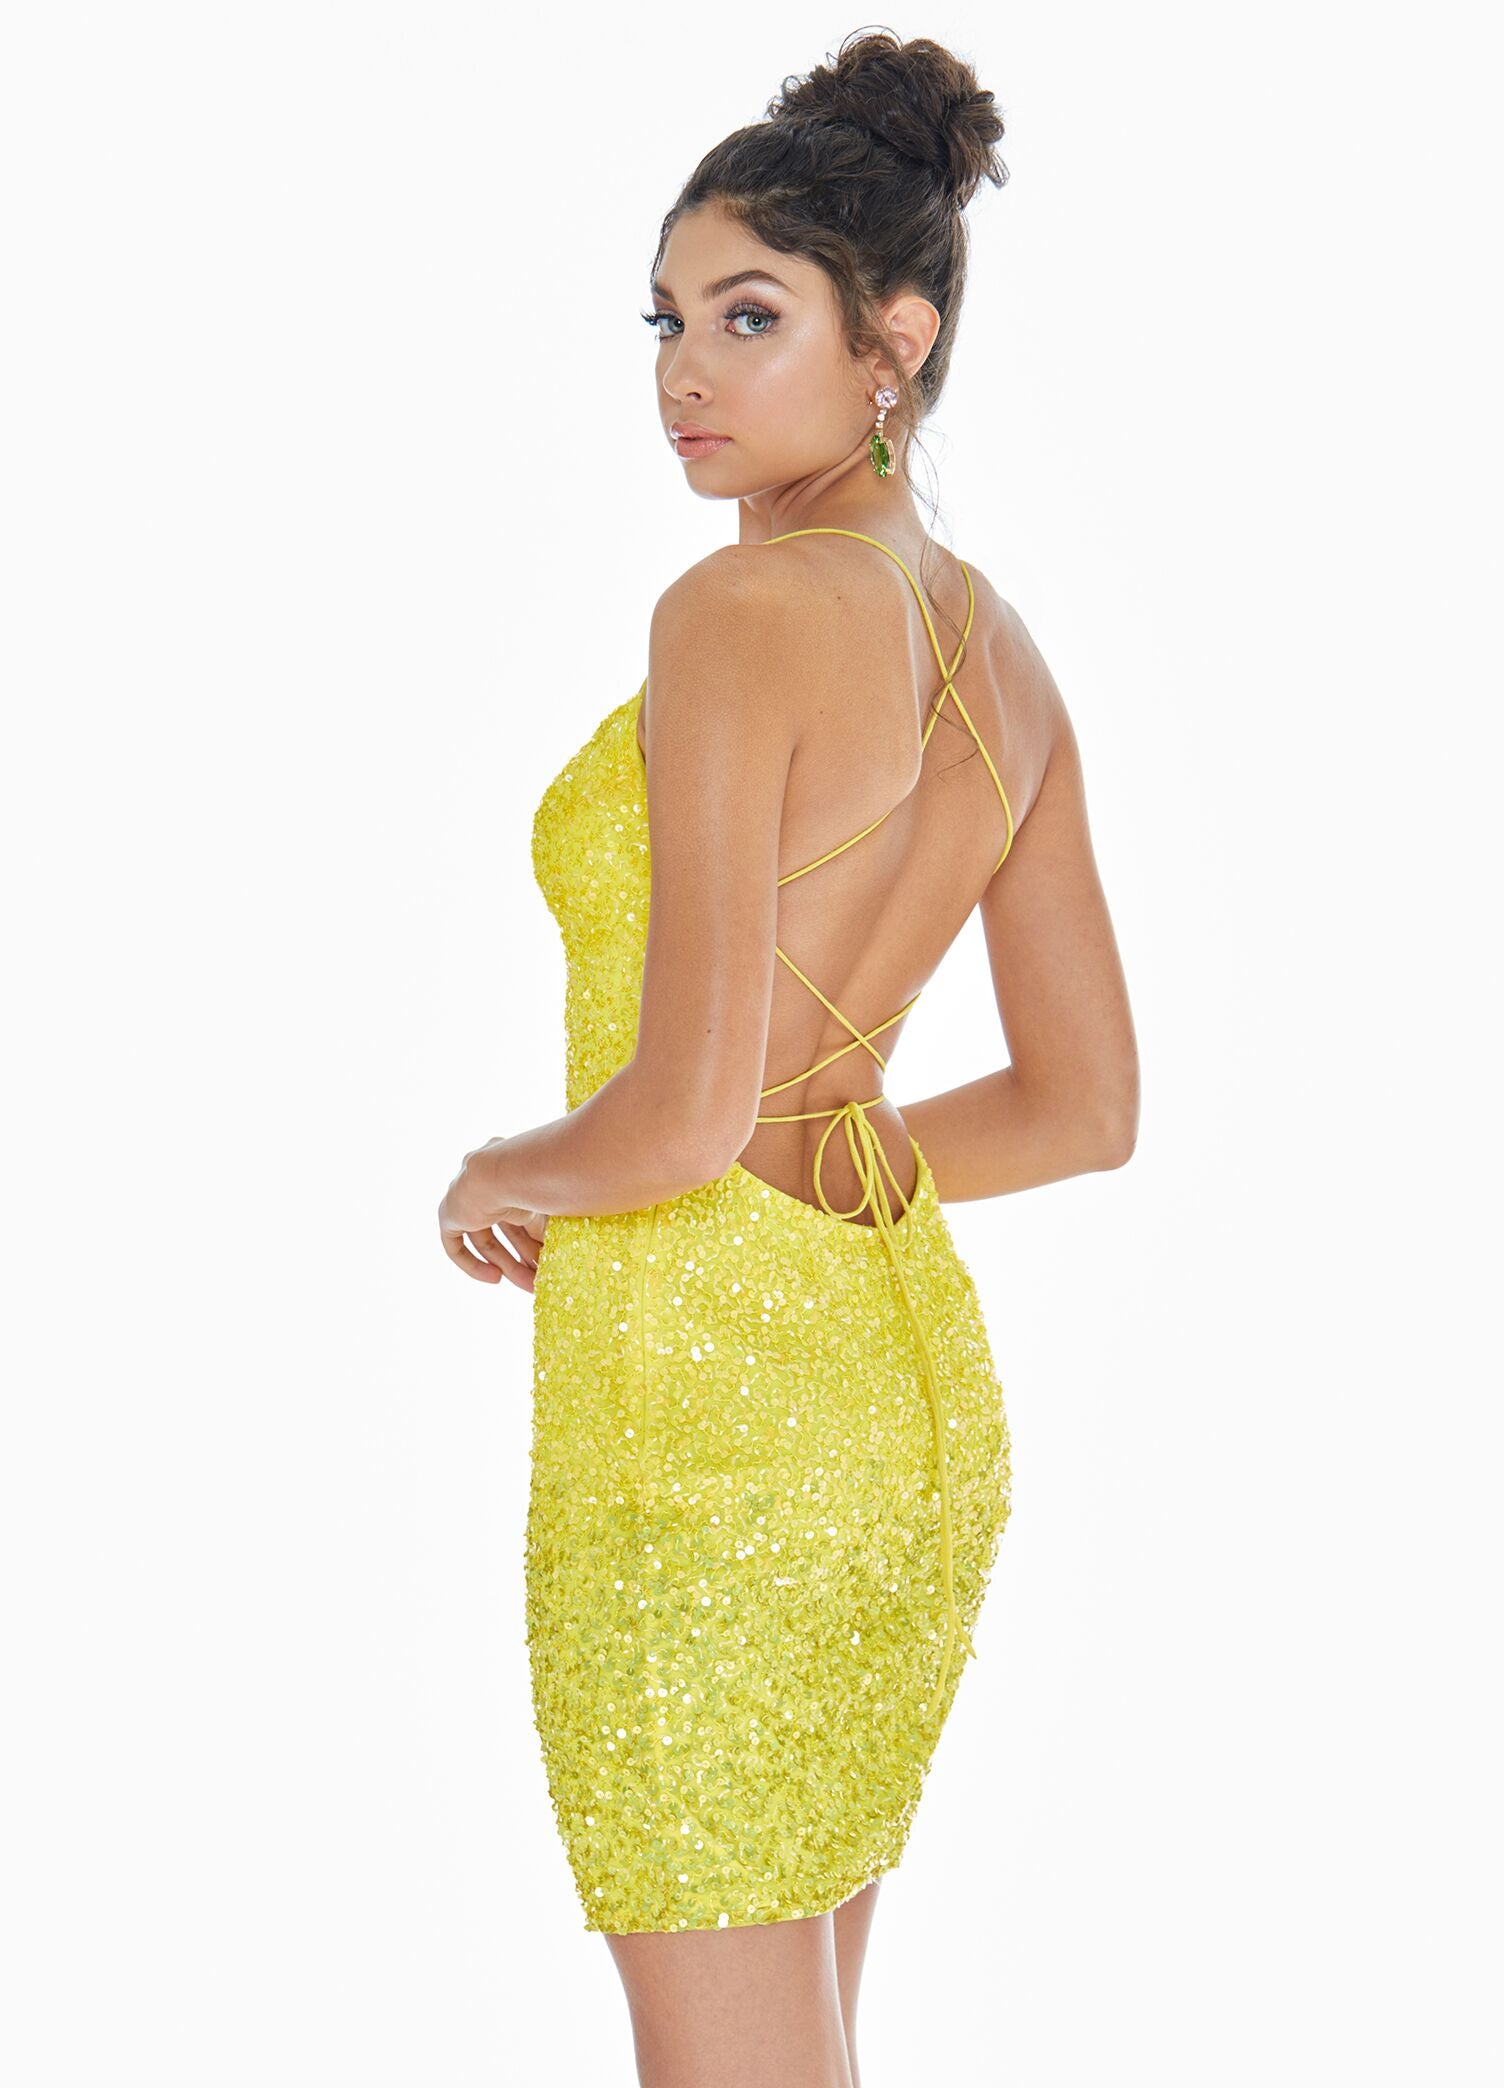 Ashley lauren 4293 fully beaded short cocktail homecoming dress with lace up back ombre beading criss cross tie open back pageant wear short prom dress 